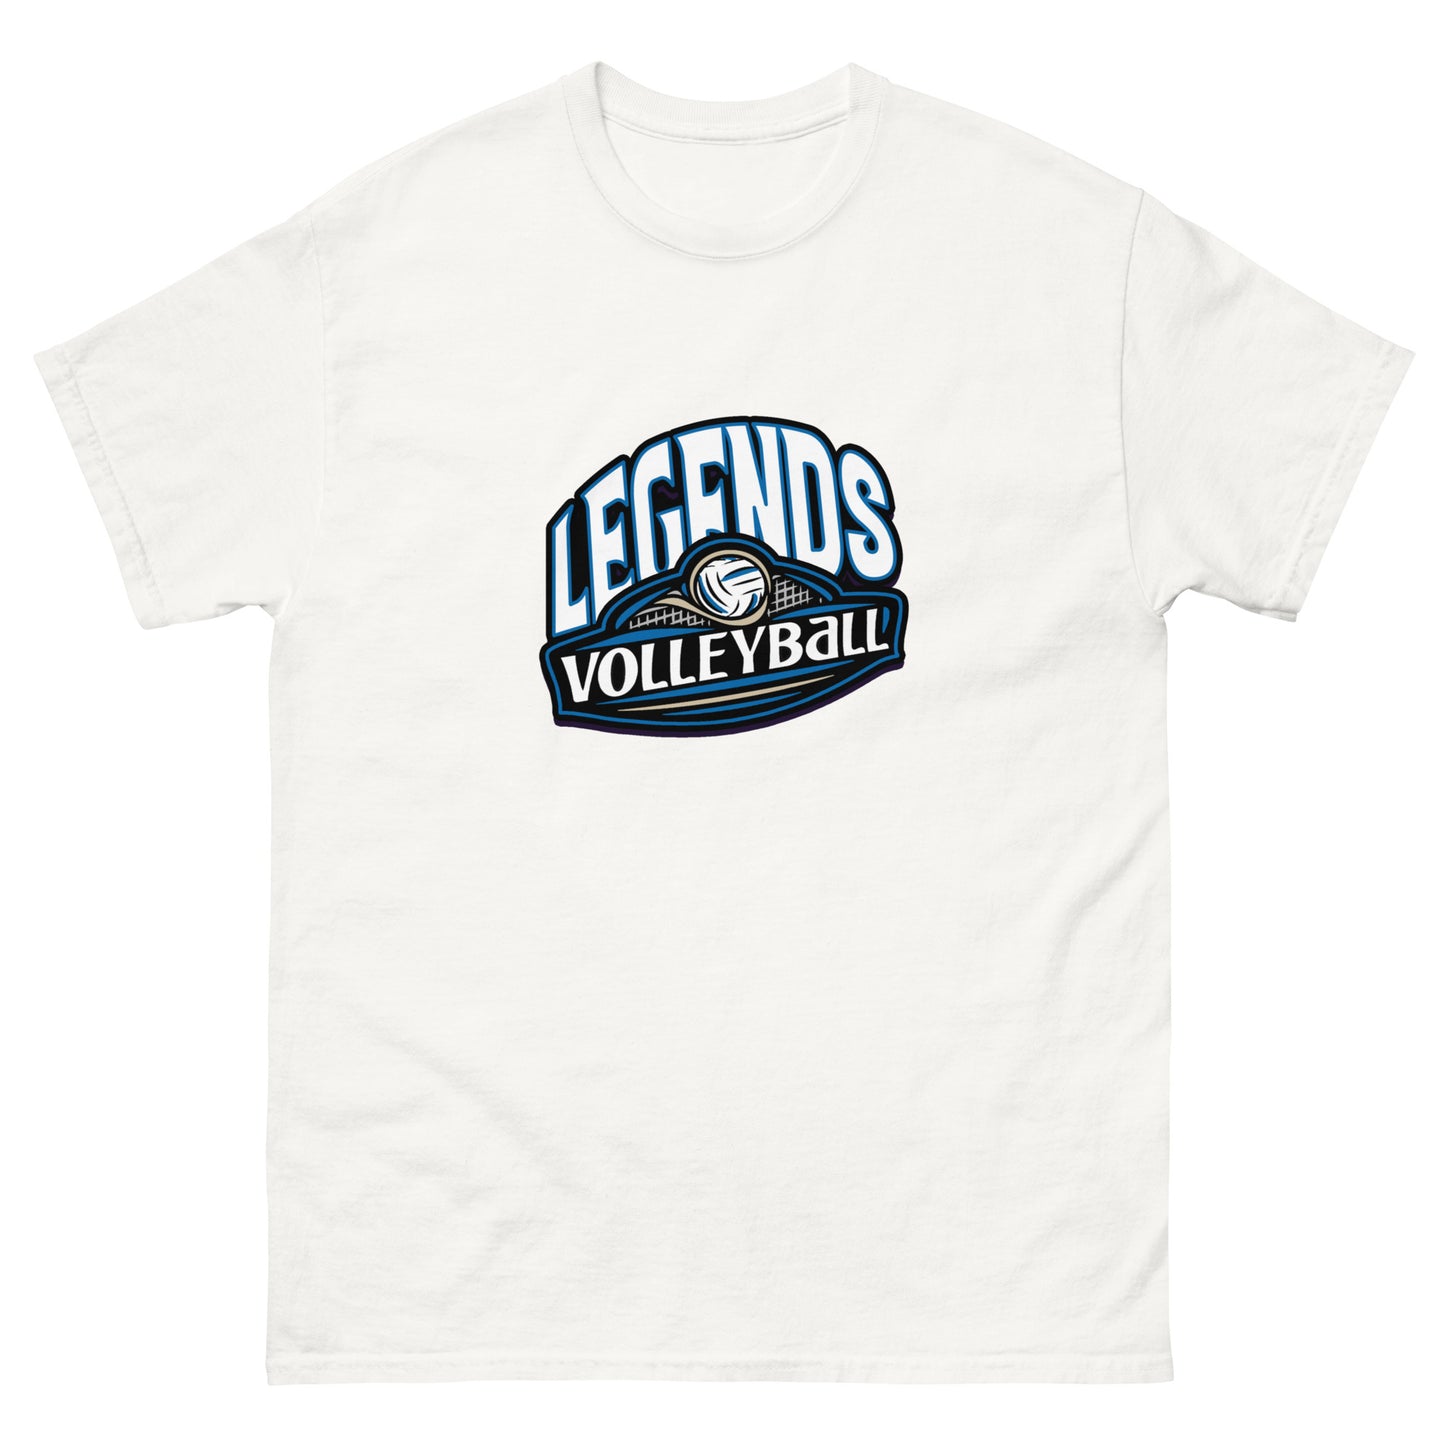 All Saints Volleyball classic tee